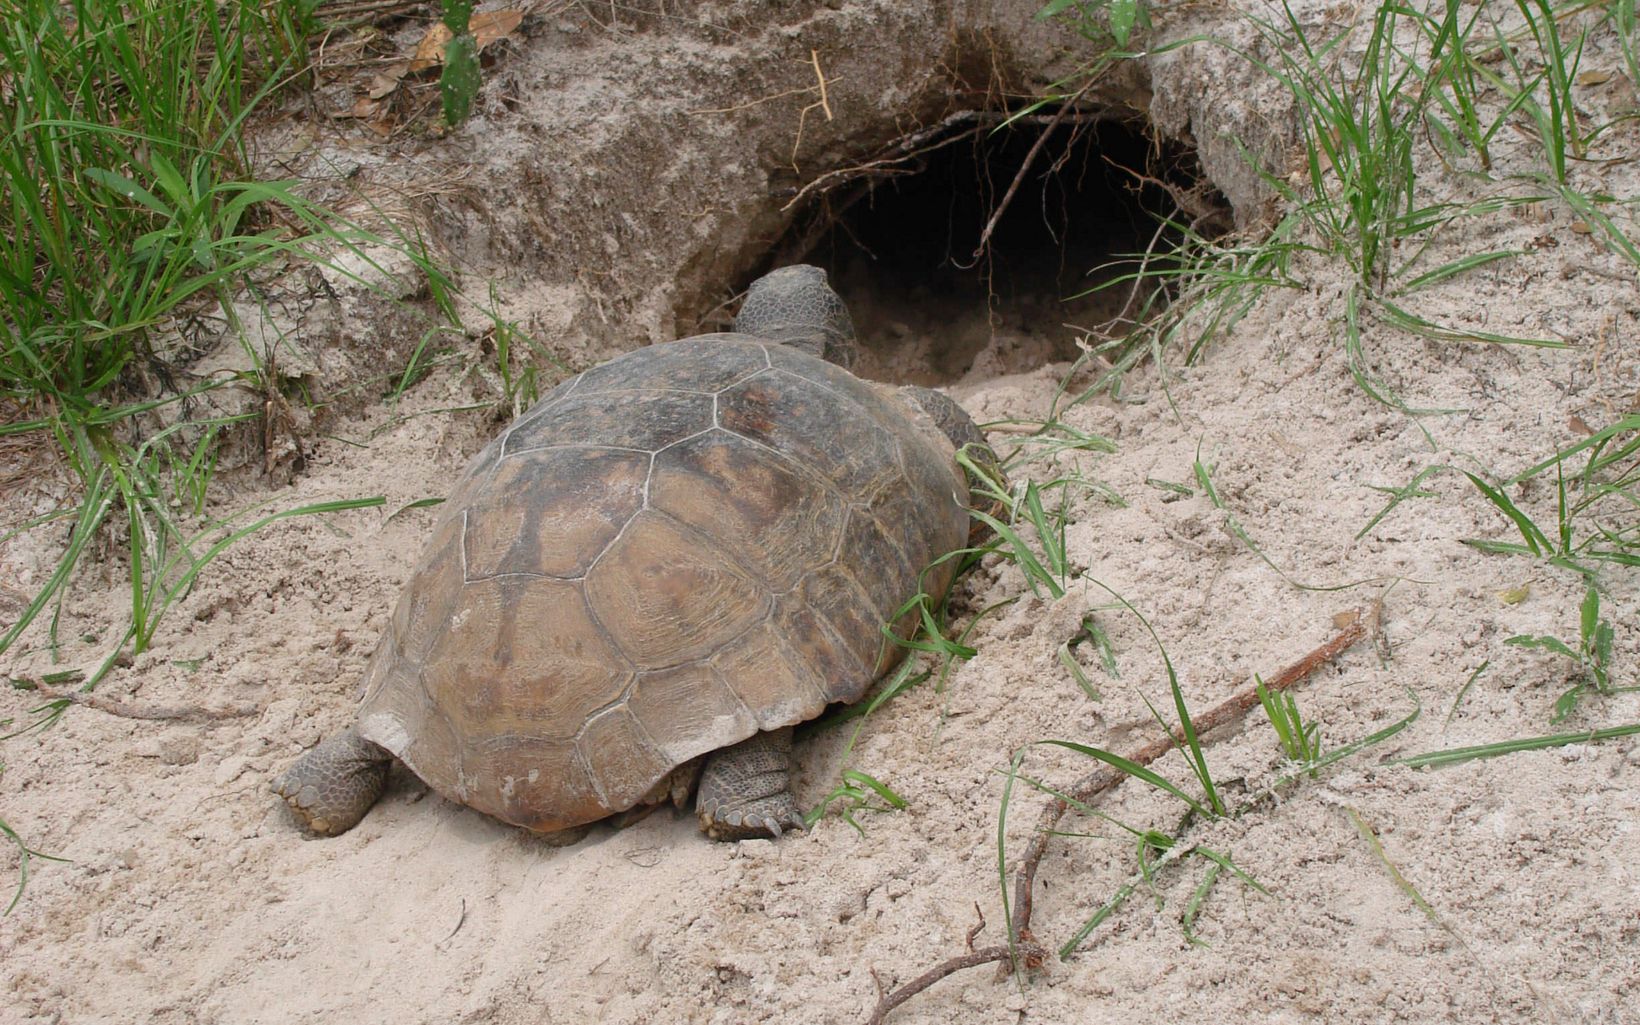 
                
                  Gopher Tortoise This umbrella species builds burrows in the sandy soil, providing refuge for many animals and insects from fires that regularly occur in longleaf pine forests.  
                  © FWC
                
              